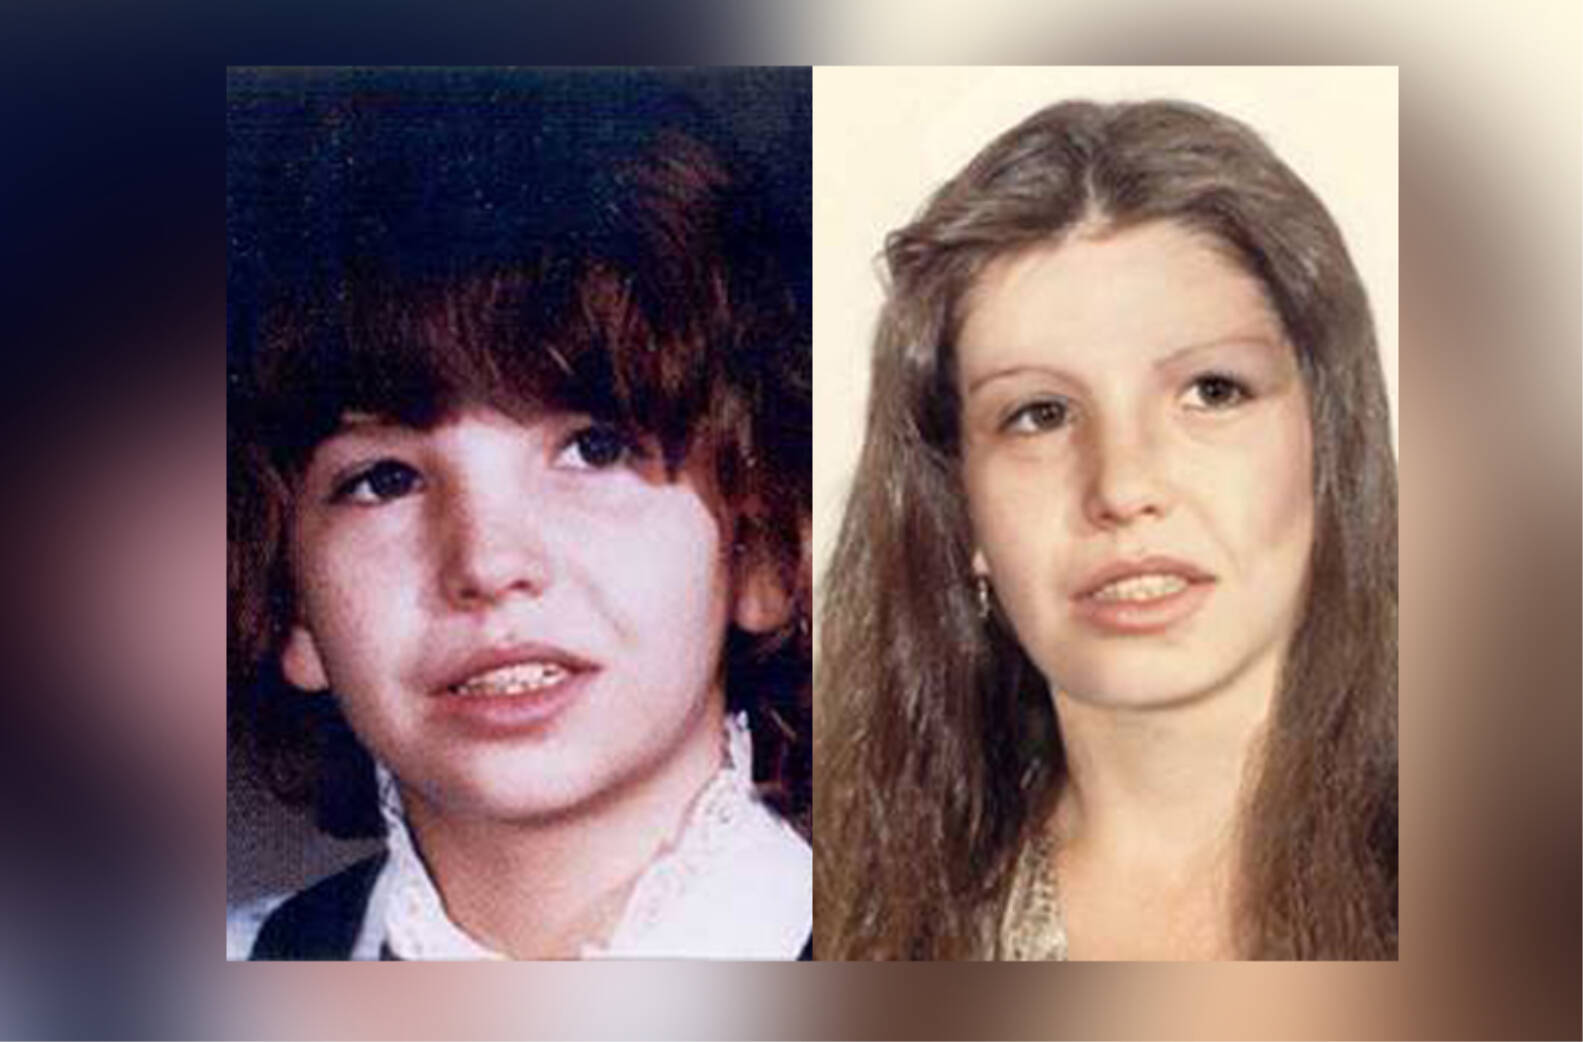 Joanne Pederson as she looked when she disappeared in 1983 (left) and how police suggested she might have looked as a 45-year-old woman in 2018 (right).